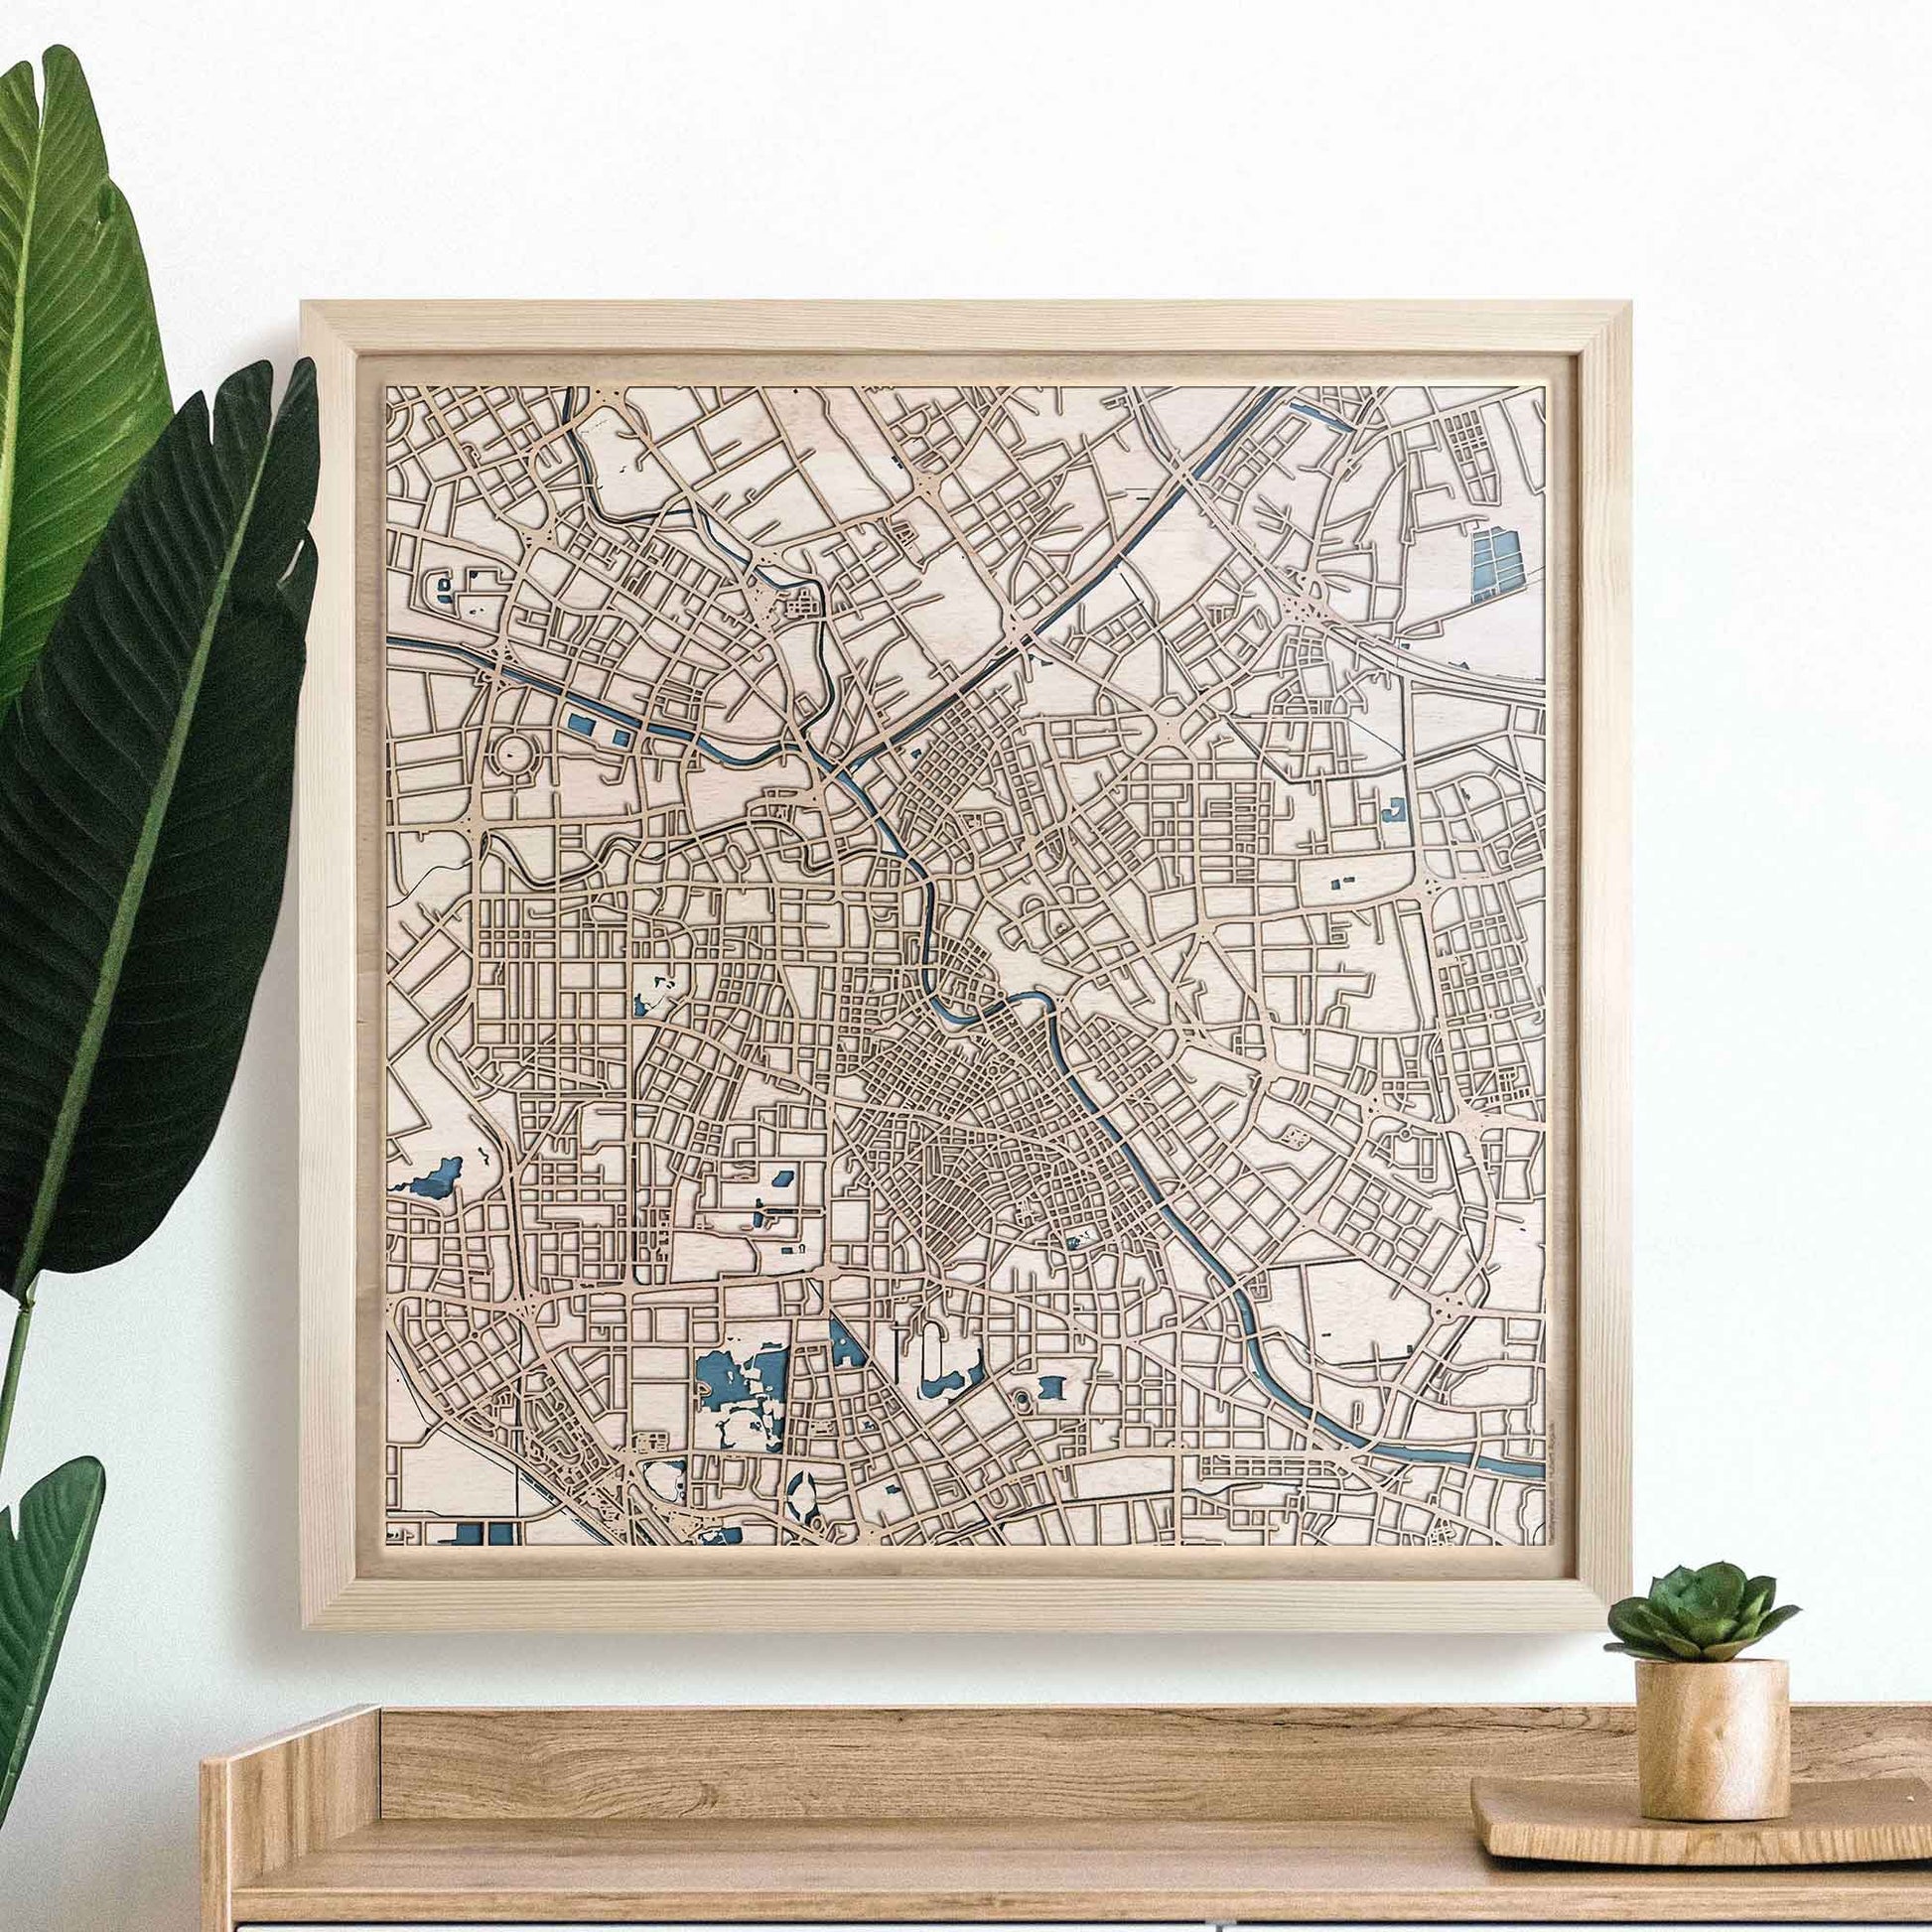 Tianjin Wooden Map by CityWood - Custom Wood Map Art - Unique Laser Cut Engraved - Anniversary Gift